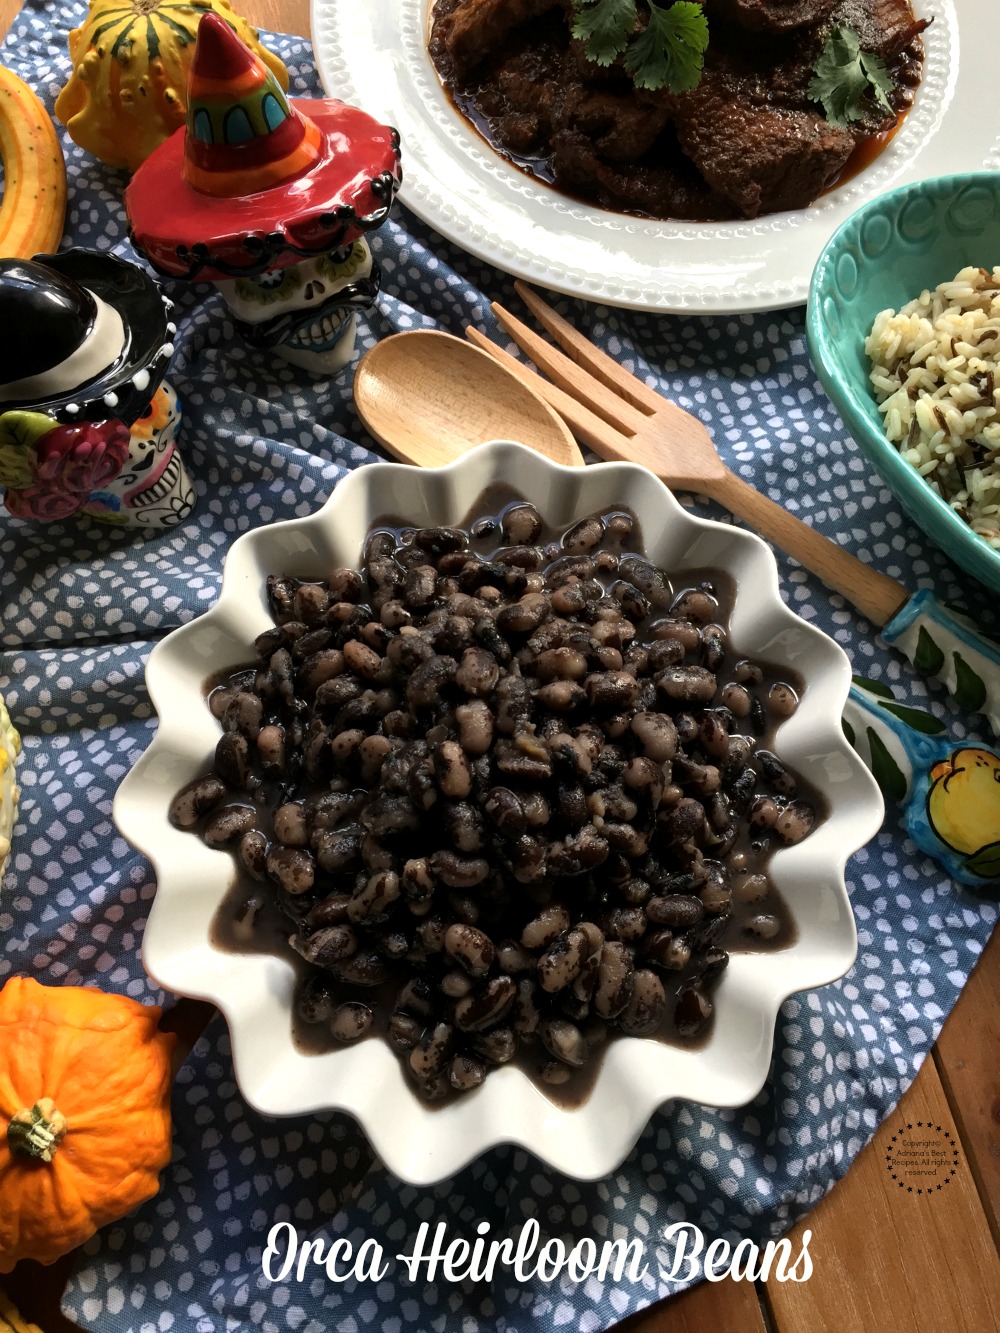 The Orca heirloom beans are native to the Caribbean 